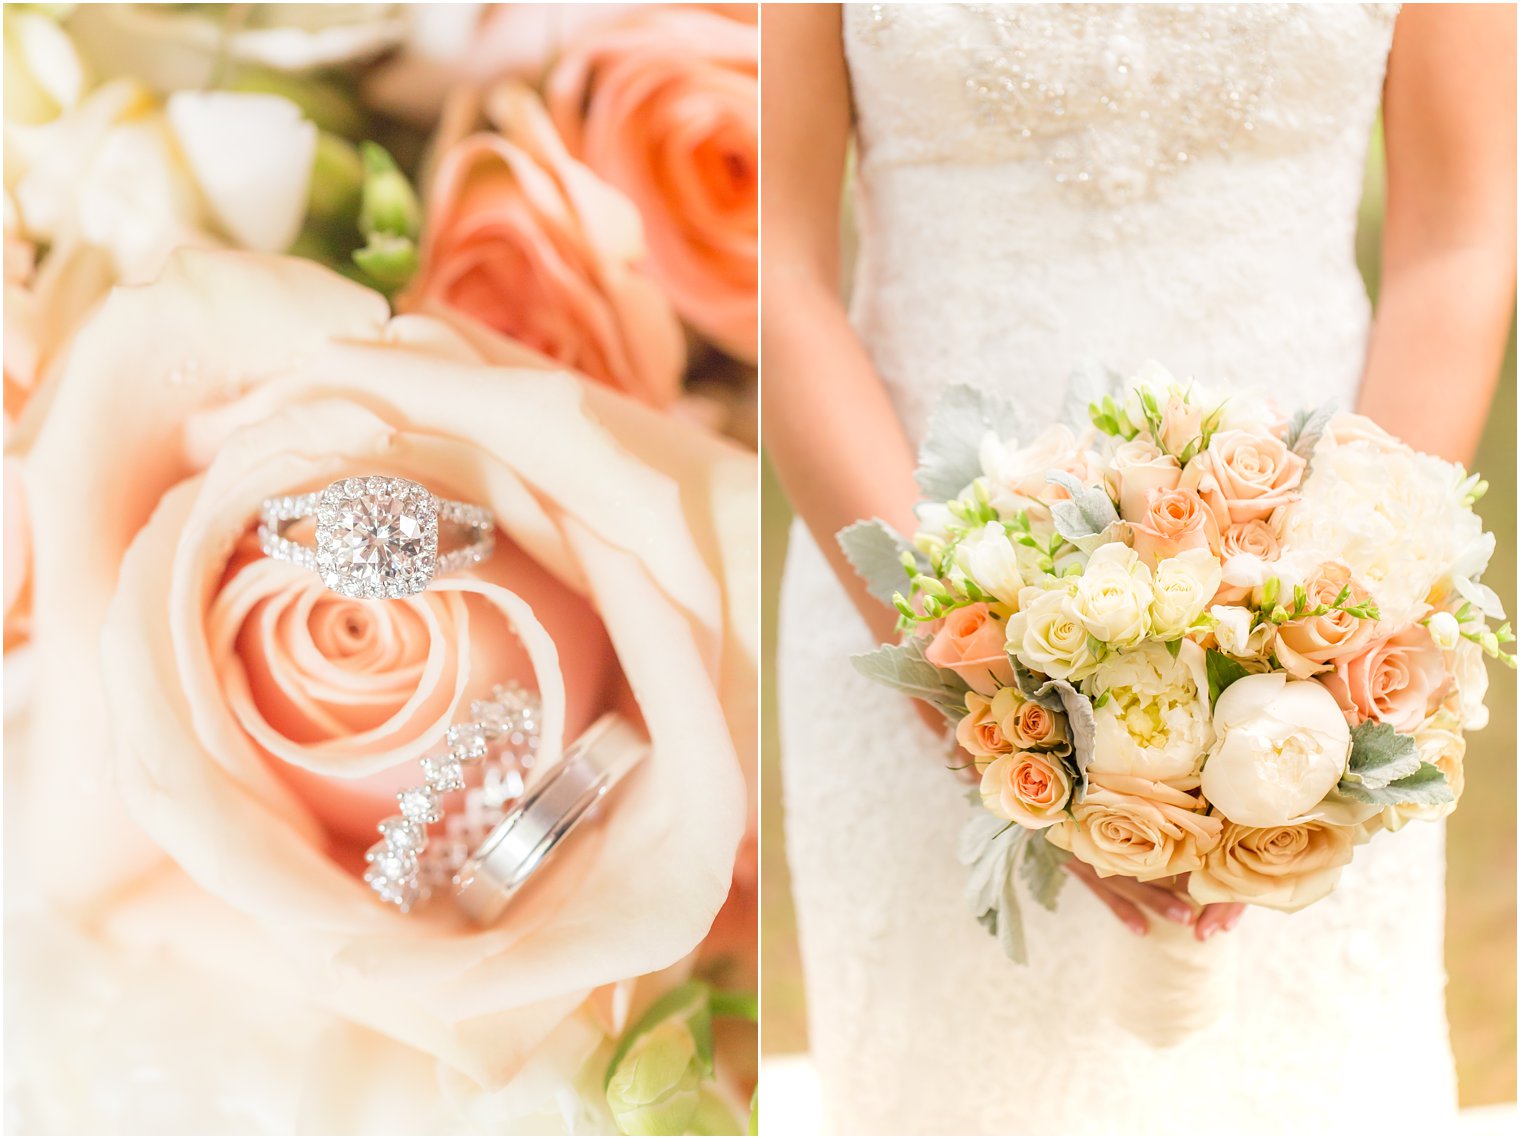 Wedding color palette in peach hues